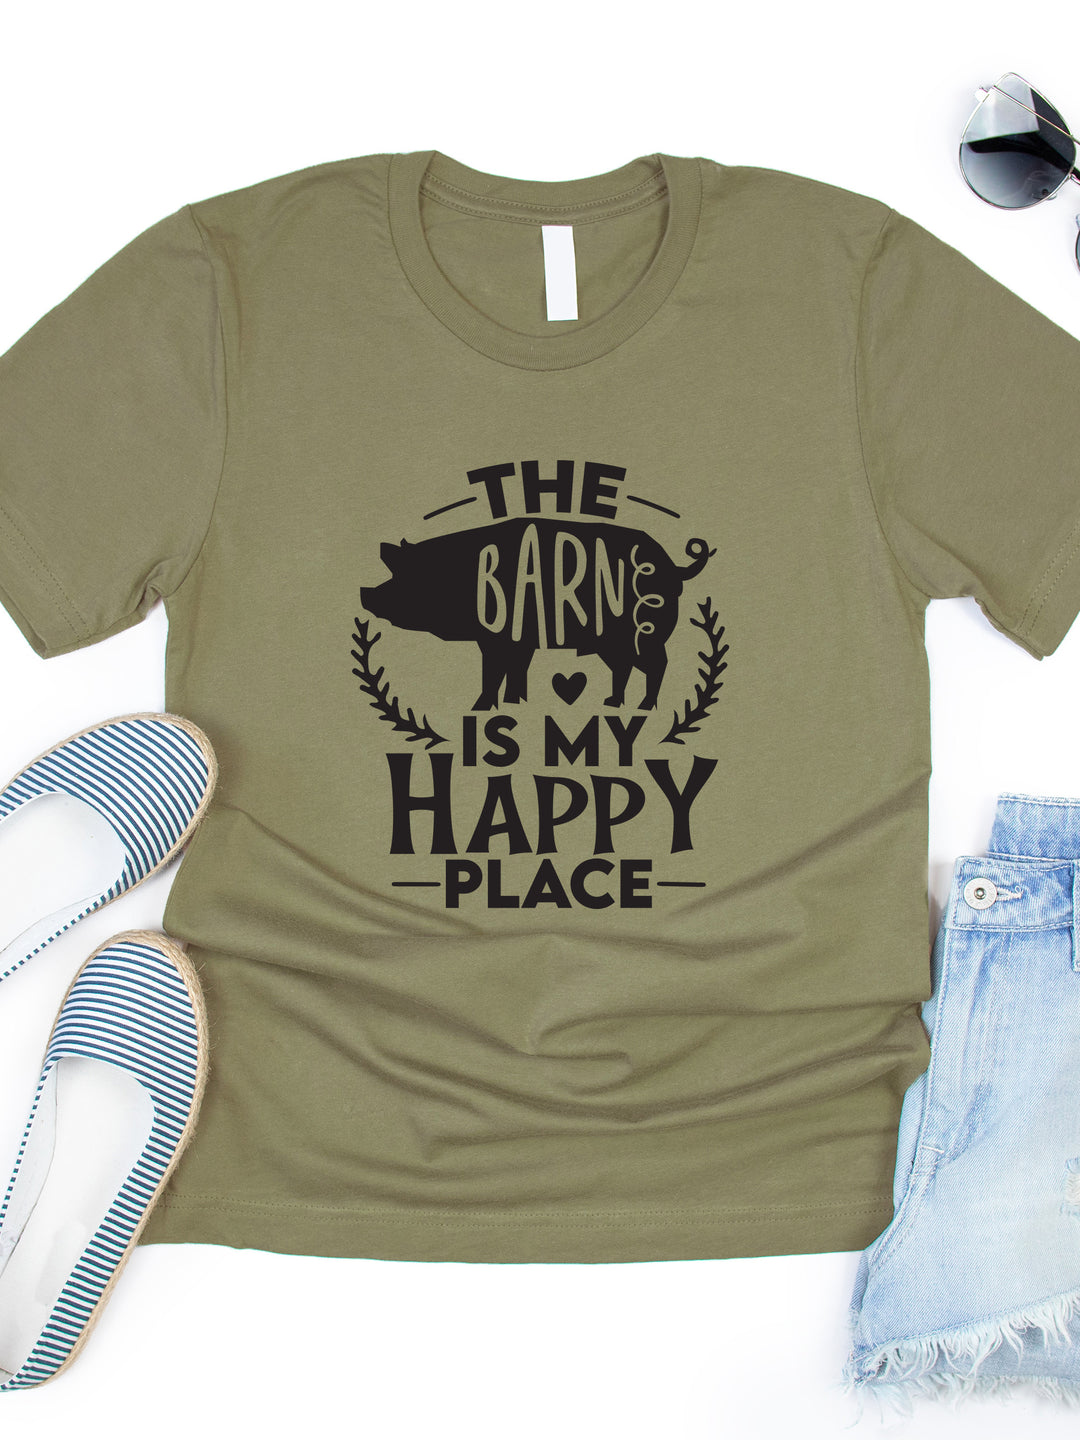 The Barn Is My Happy Place Graphic Tee